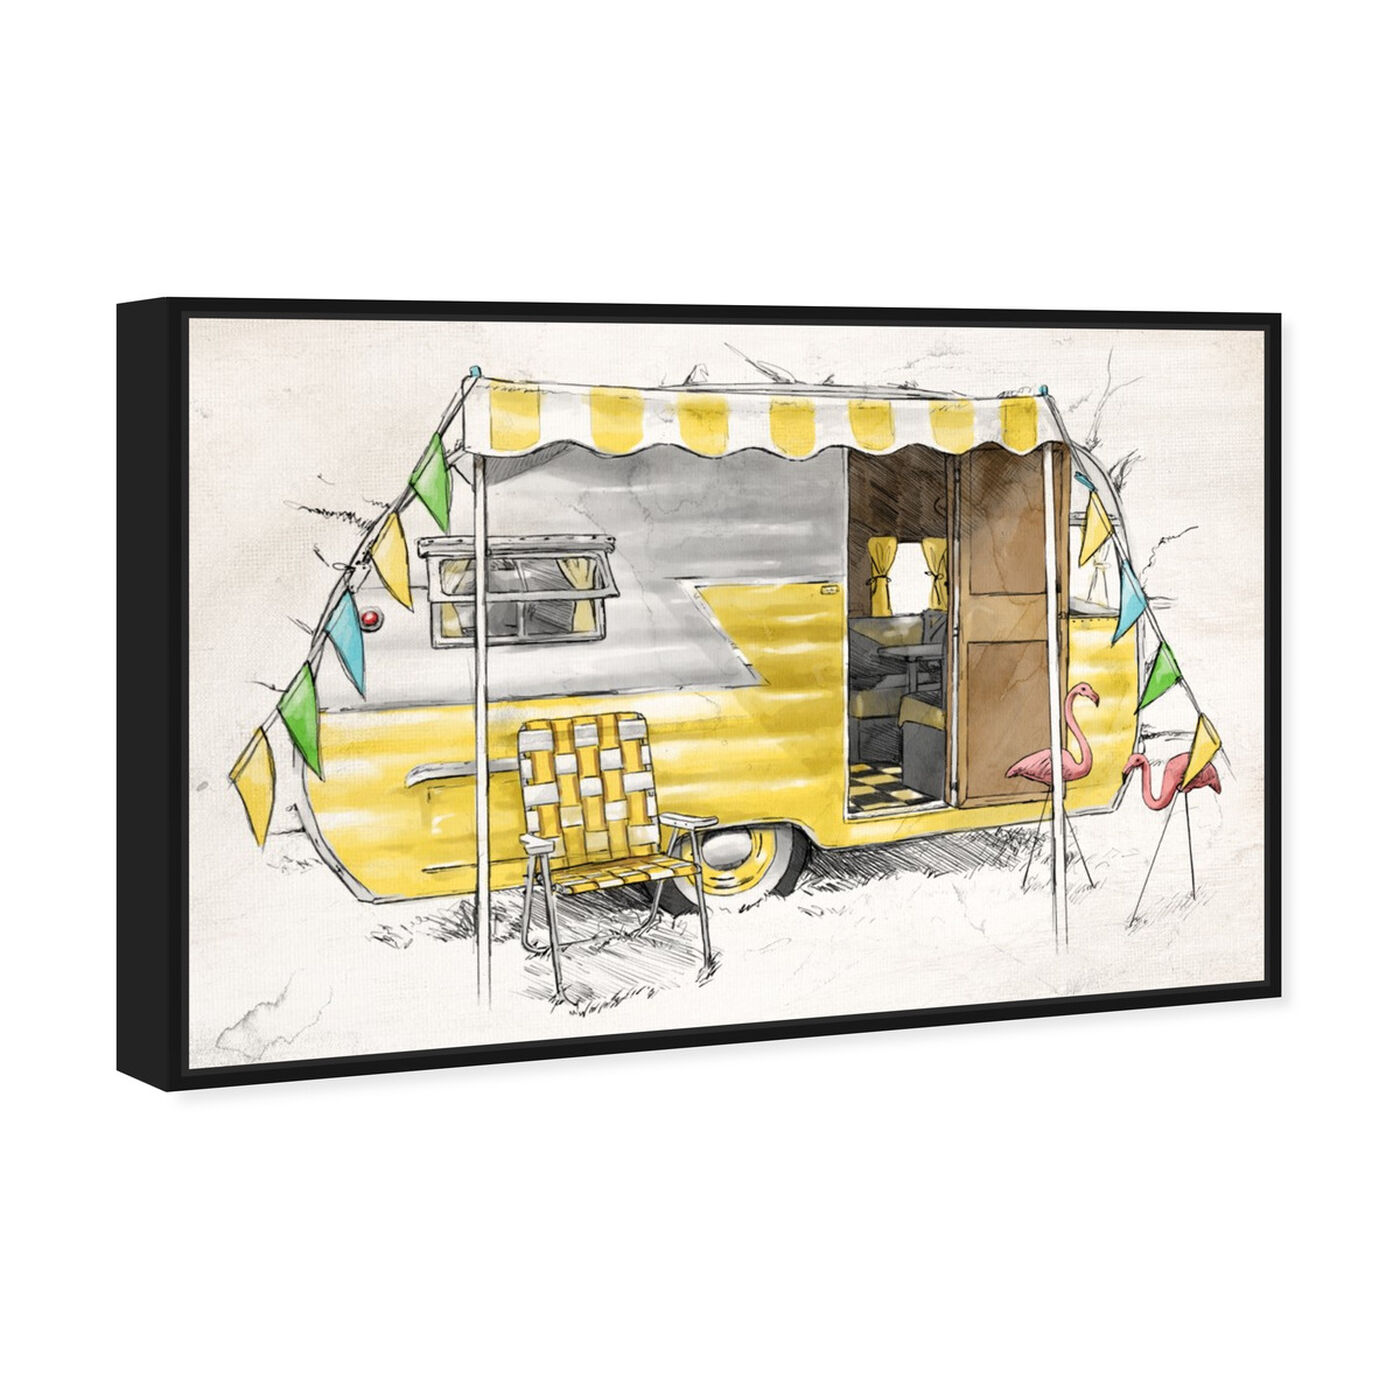 Angled view of Yellow Camper featuring entertainment and hobbies and camping art.